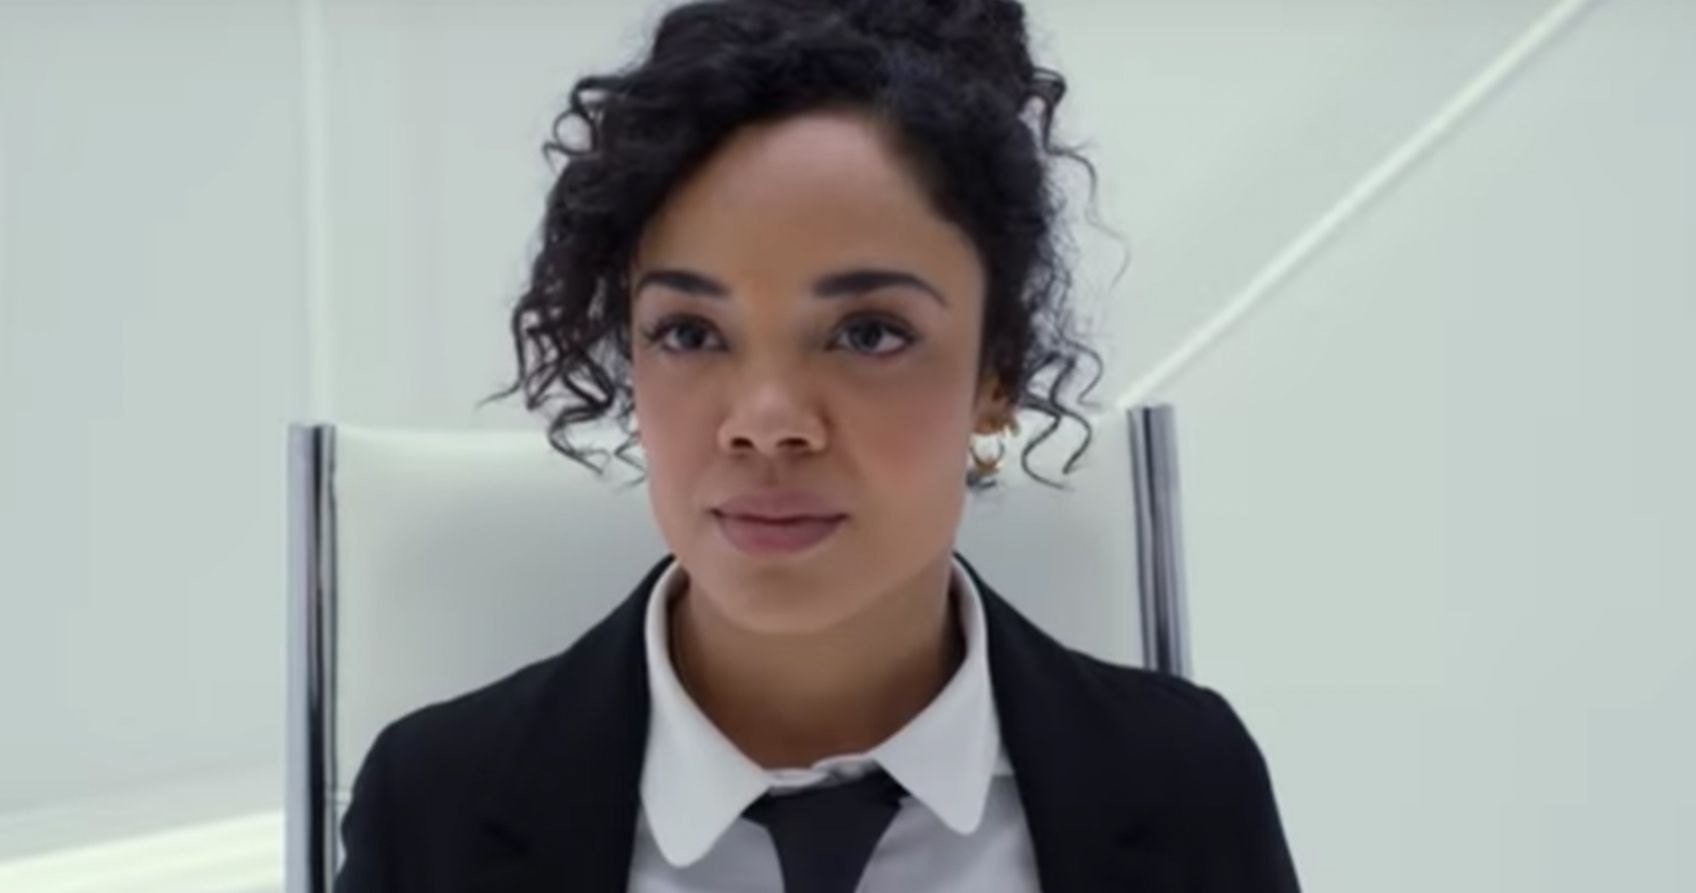 The Iconic Men in Black Line Tessa Thompson Refused to Say